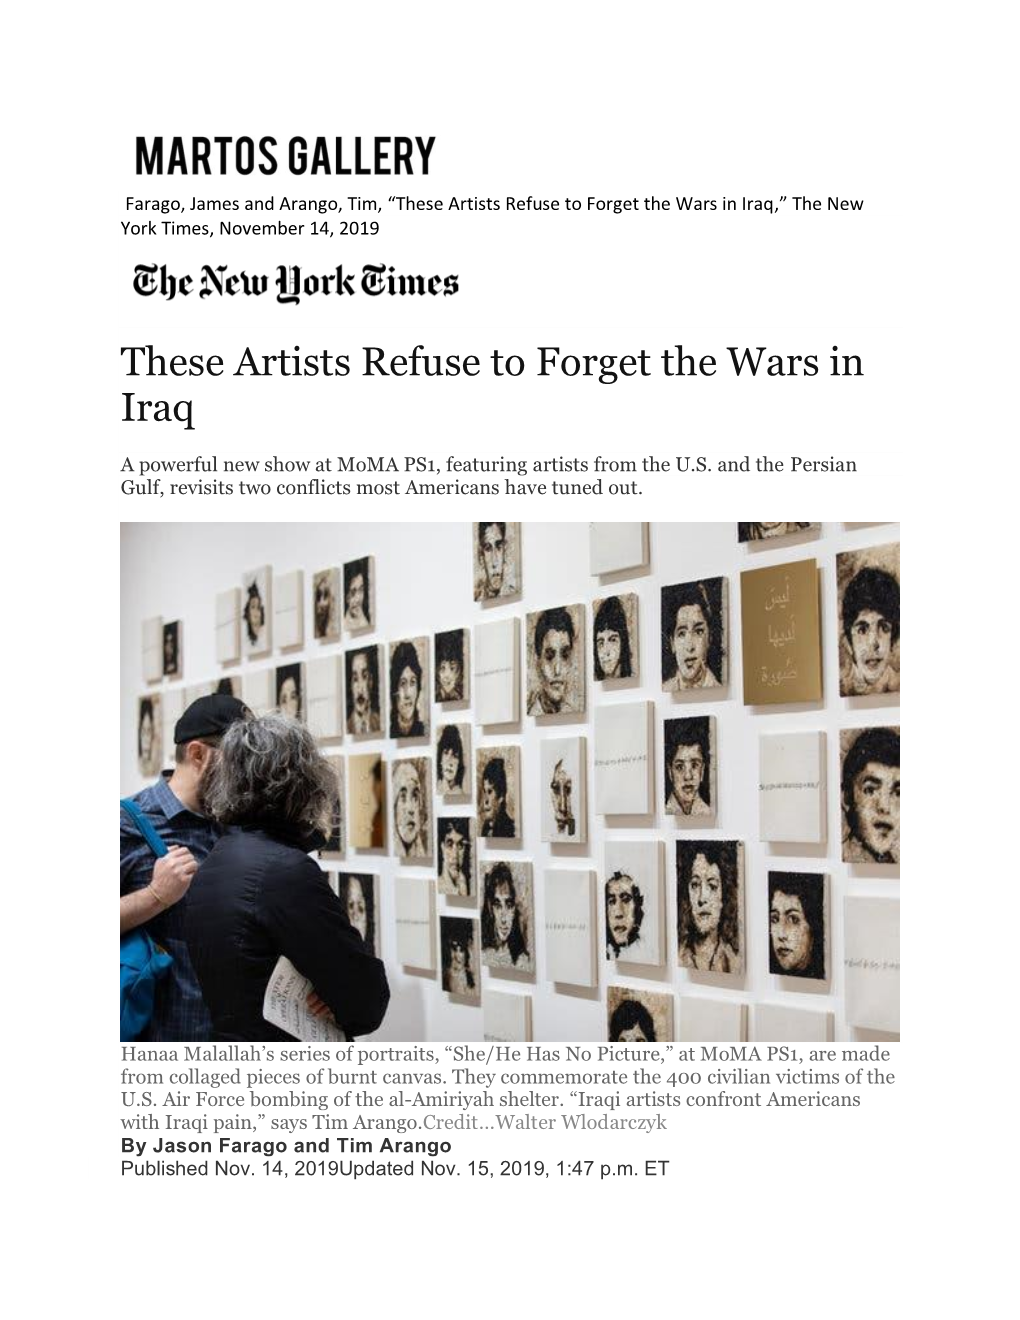 These Artists Refuse to Forget the Wars in Iraq,” the New York Times, November 14, 2019